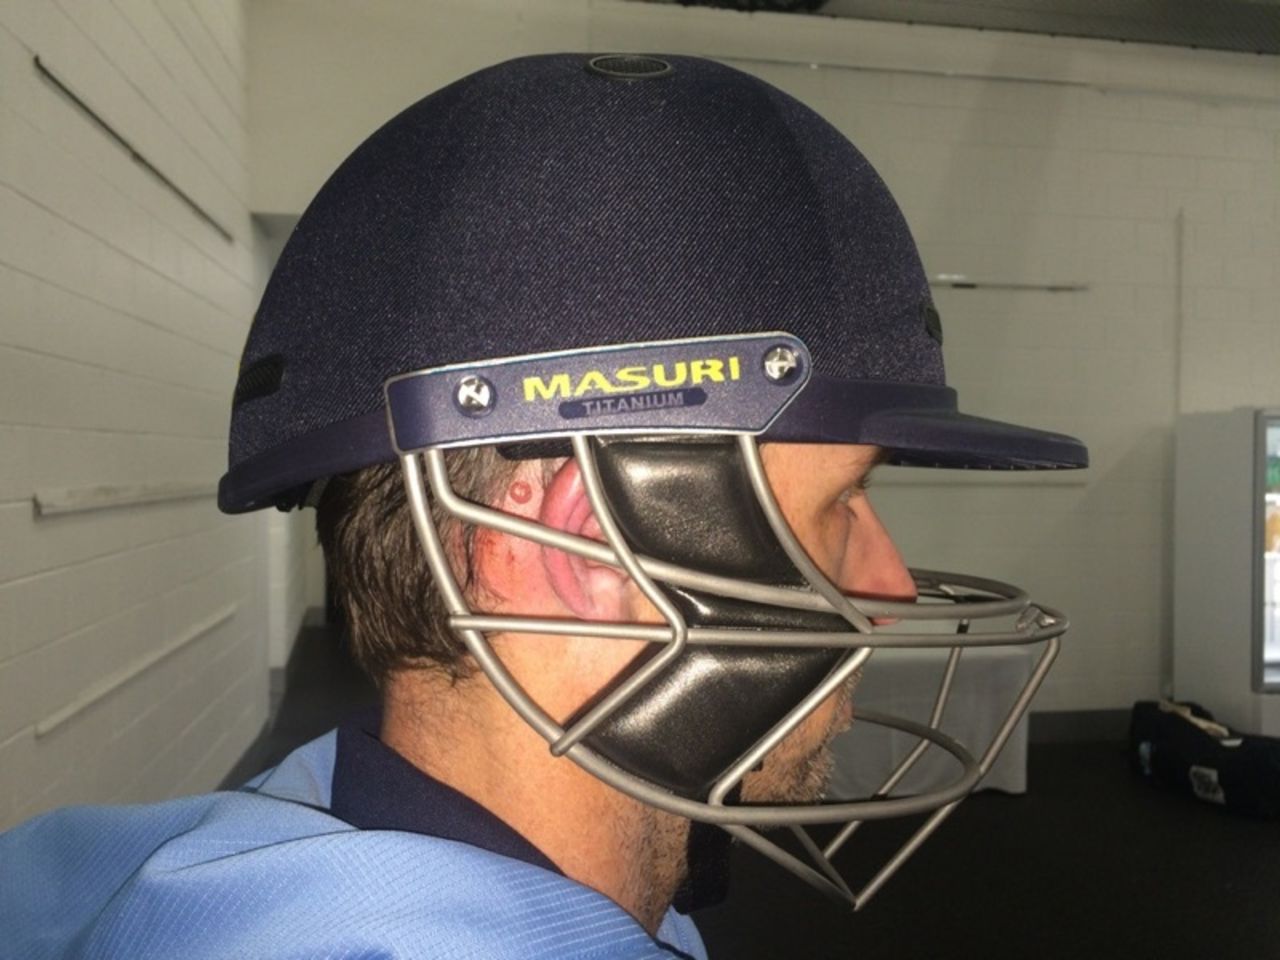 Ben Rohrer wearing the new Masuri helmet, showing where he was struck, Victoria v New South Wales, 4th day, Sheffield Shield, Melbourne, November 3, 2014